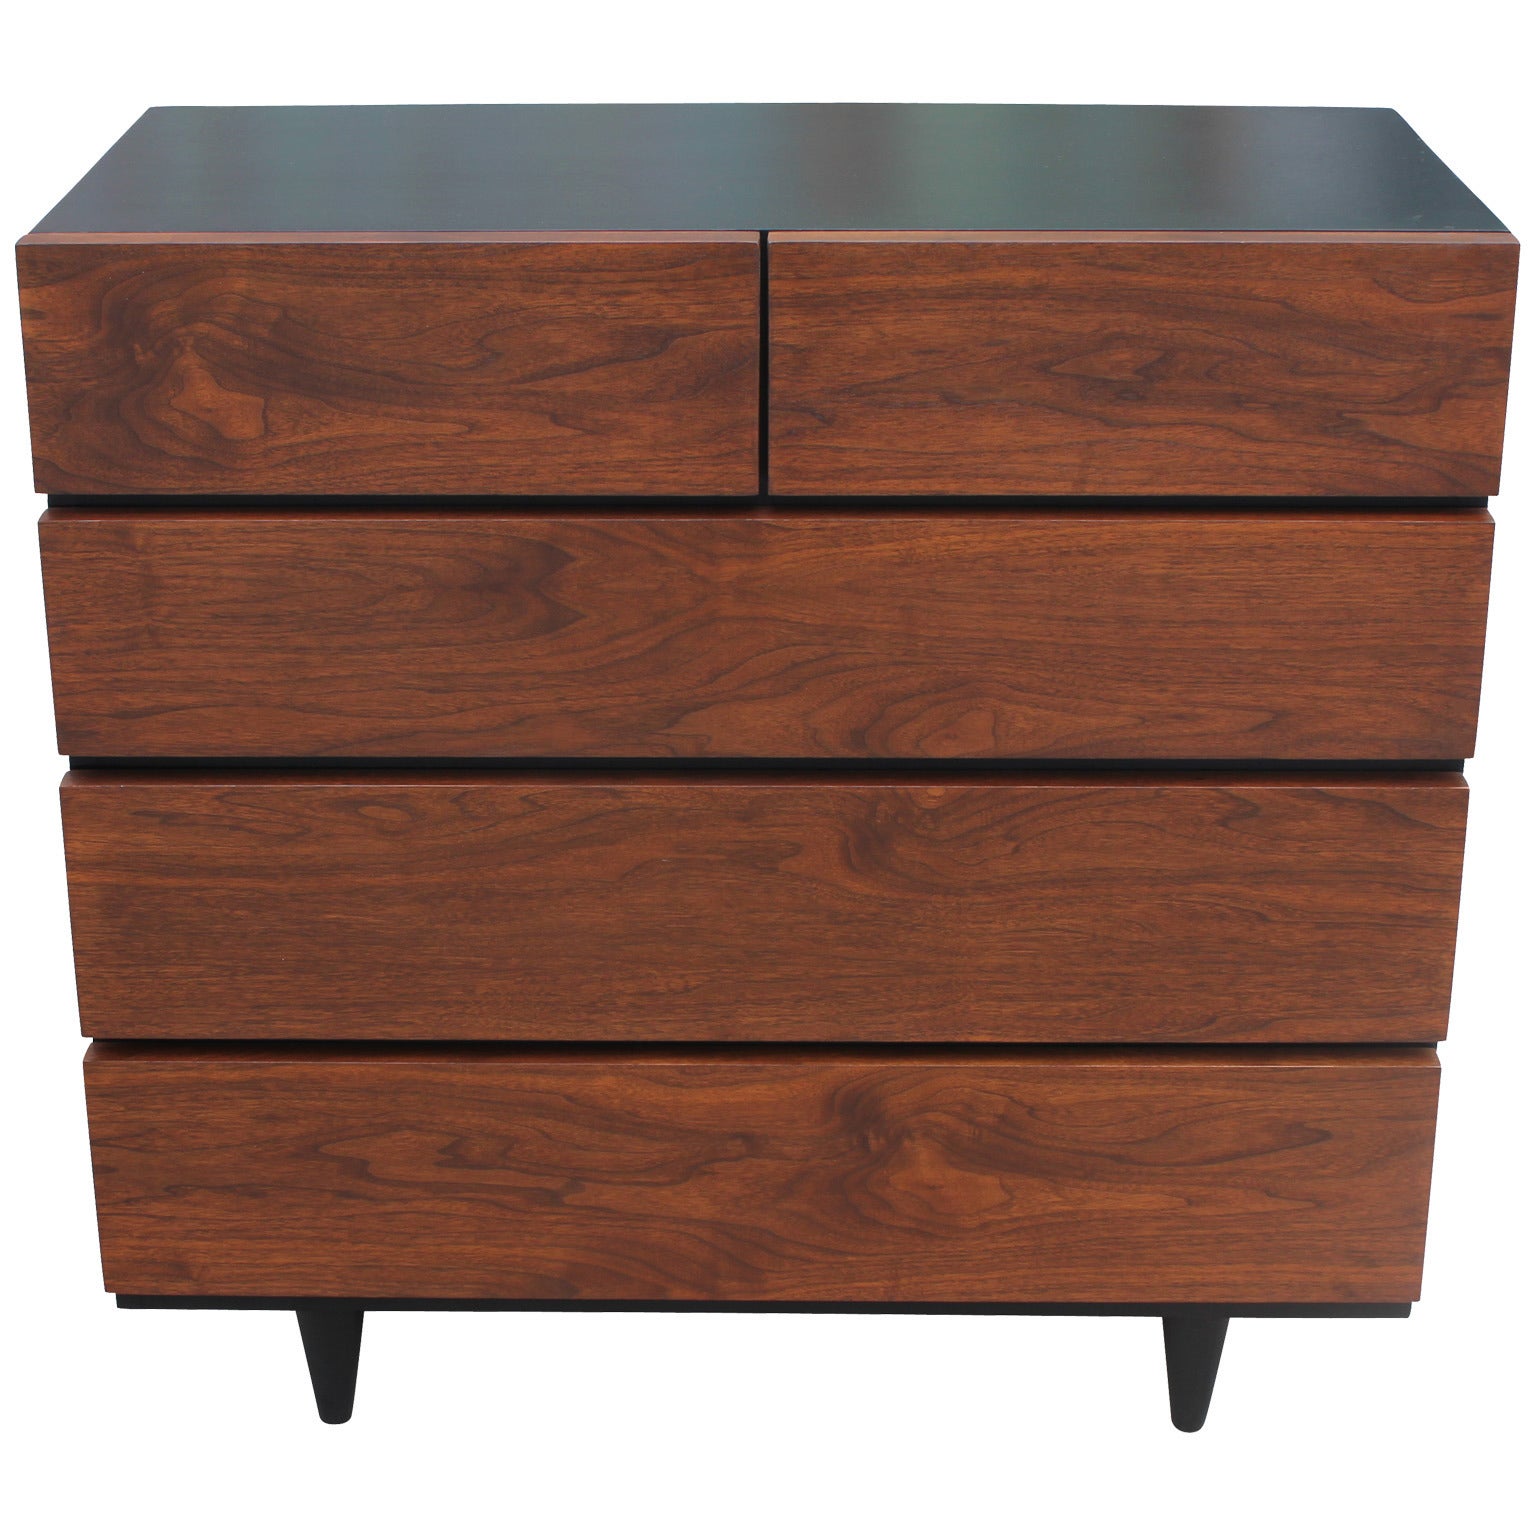 Sleek Two-Tone Dresser by American of Martinsville